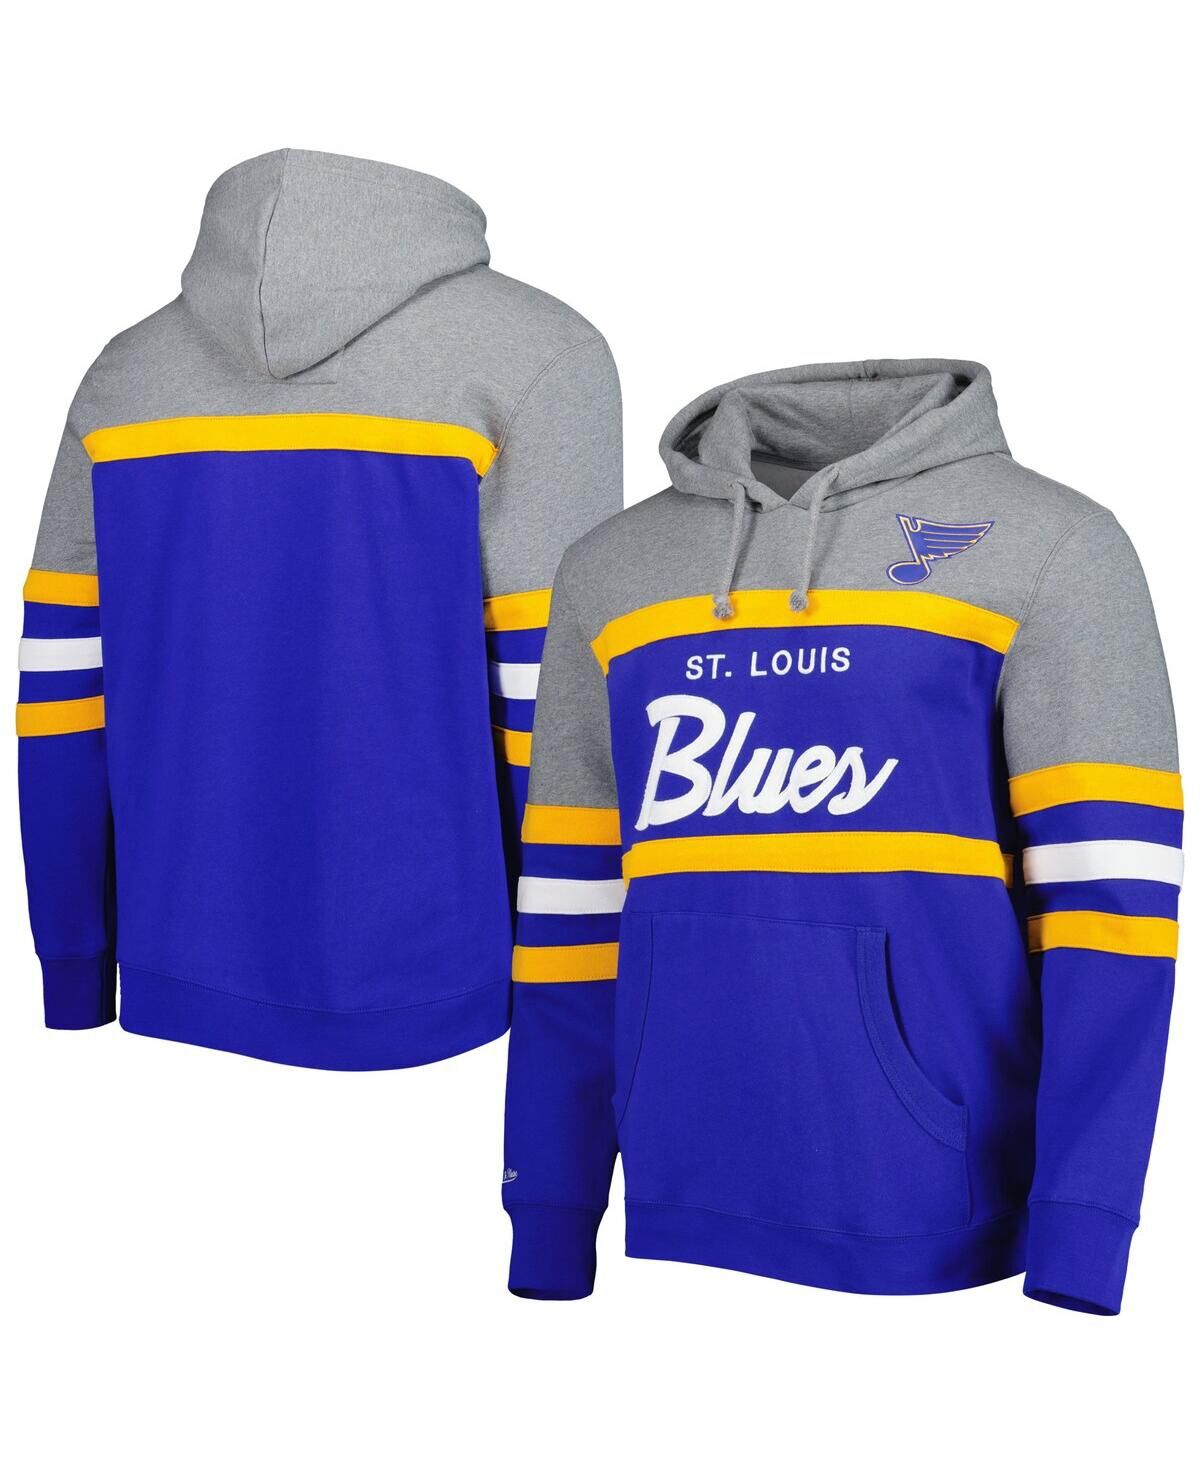 Mitchell & Ness Men's Mitchell & Ness Blue, Heather Gray St. Louis Blues Head Coach Pullover Hoodie - Blue, Heather Gray